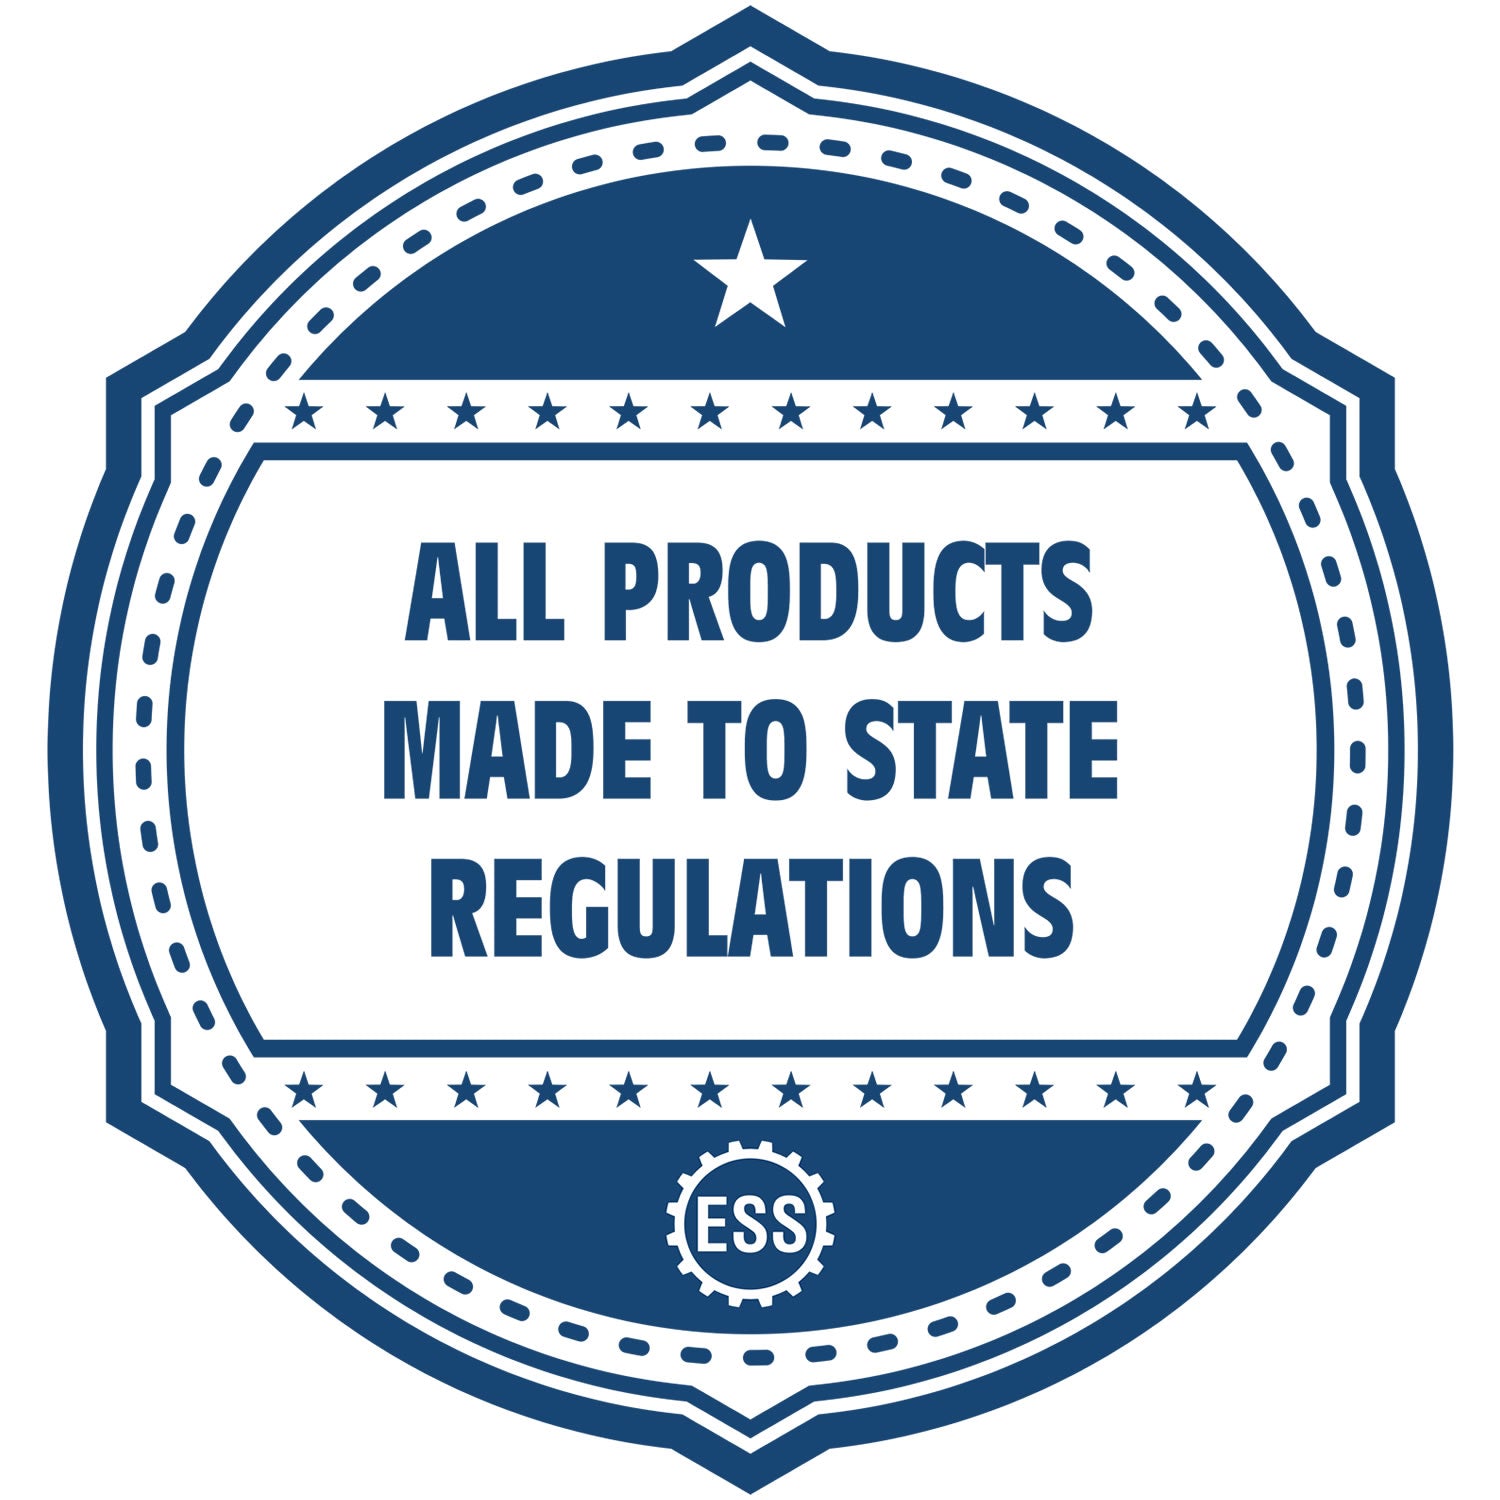 An icon or badge element for the Extended Long Reach North Carolina Architect Seal Embosser showing that this product is made in compliance with state regulations.